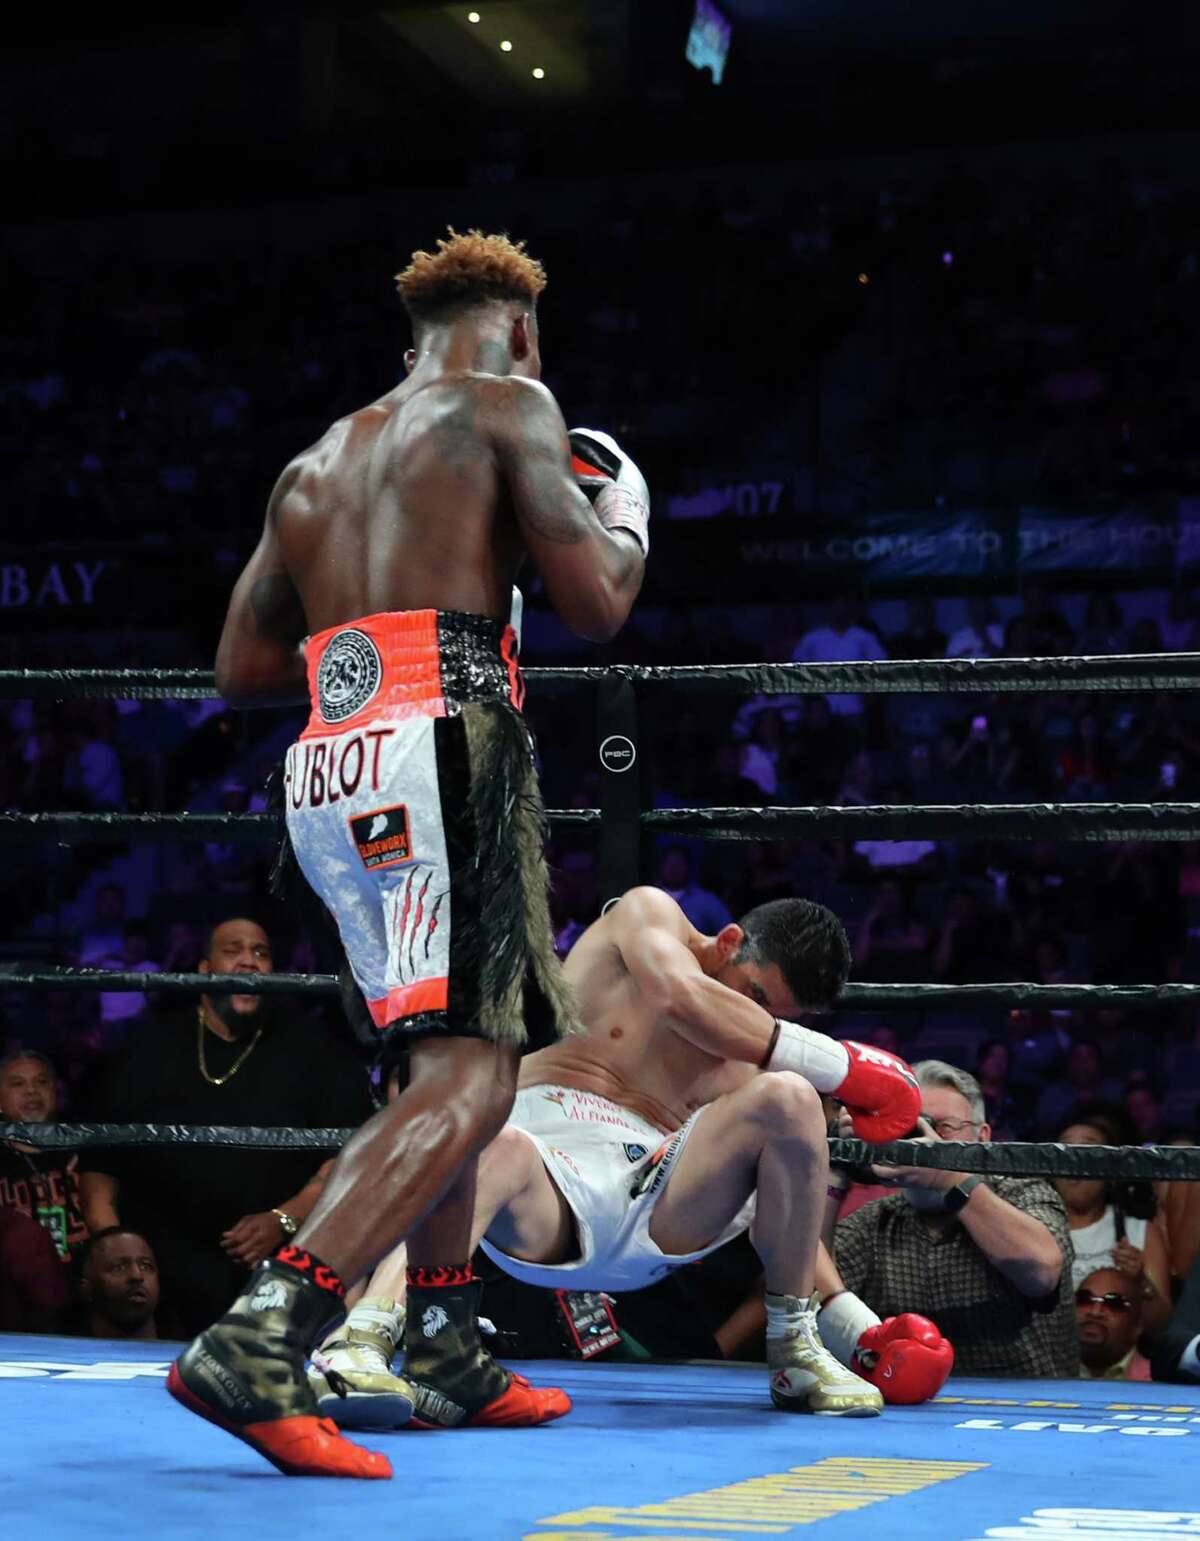 Jermell Charlo scores thunderous knockout win over Cota